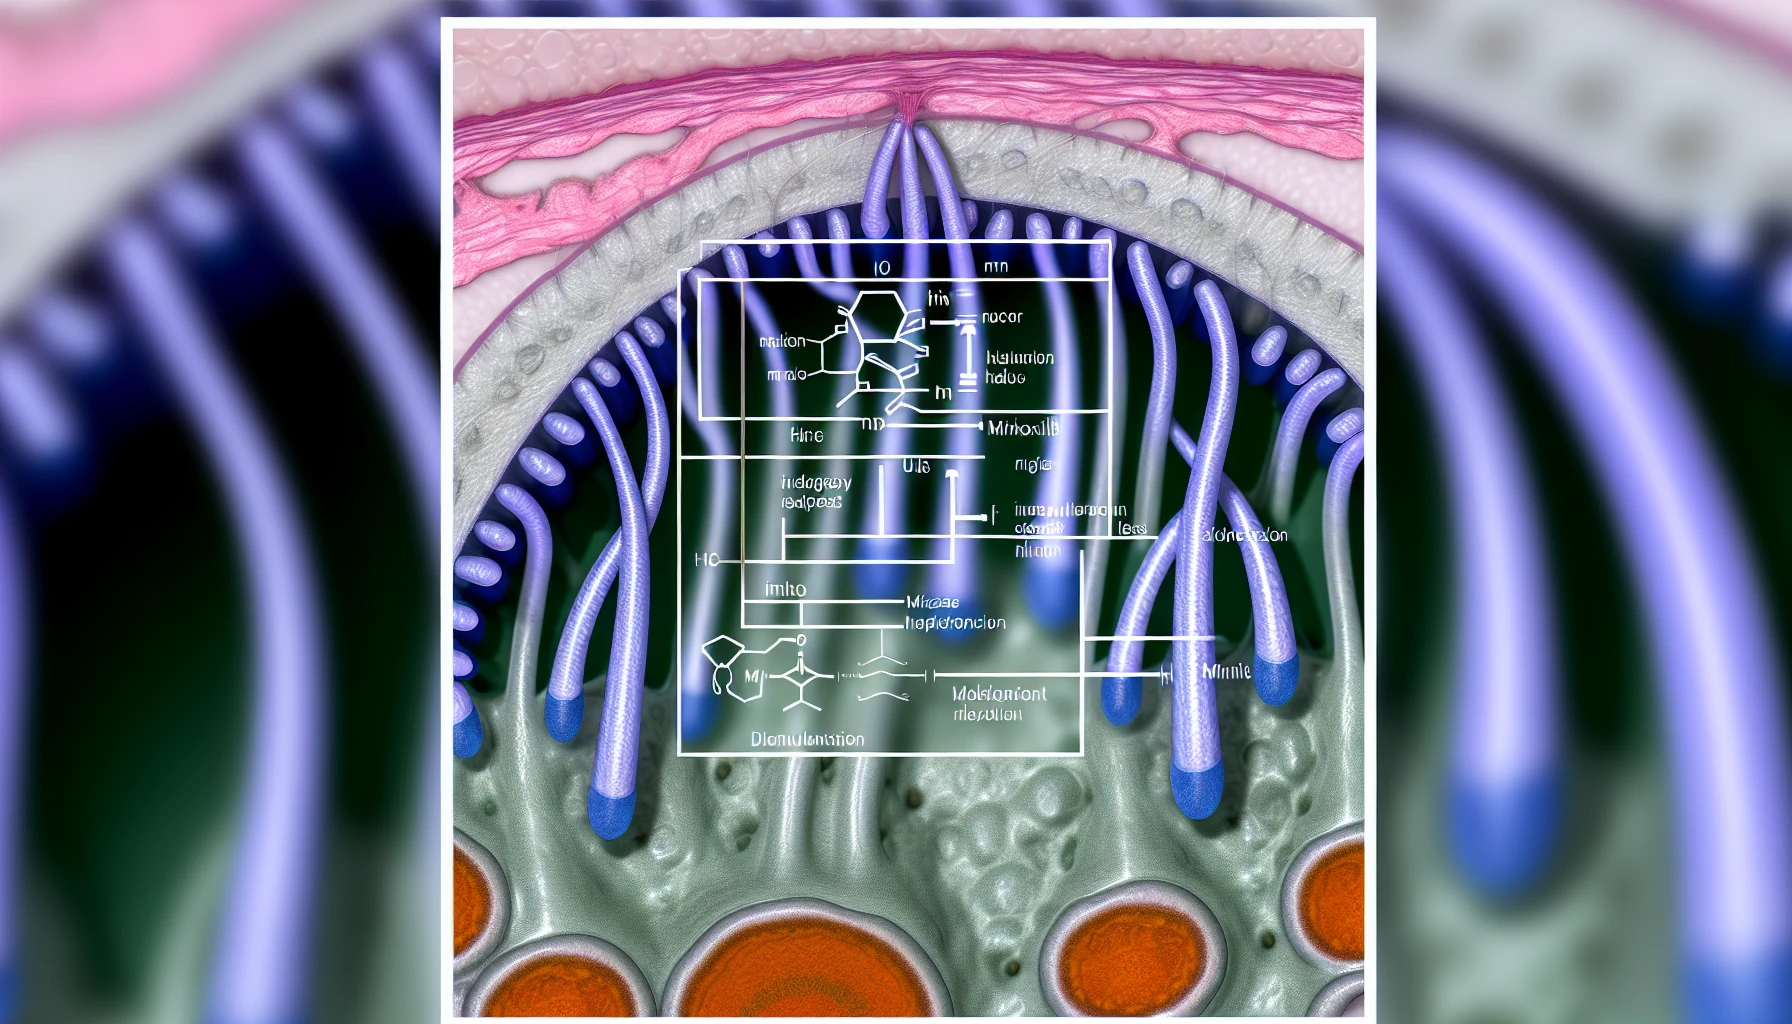 A close-up of a hair follicle with a diagram illustrating the hair growth cycle